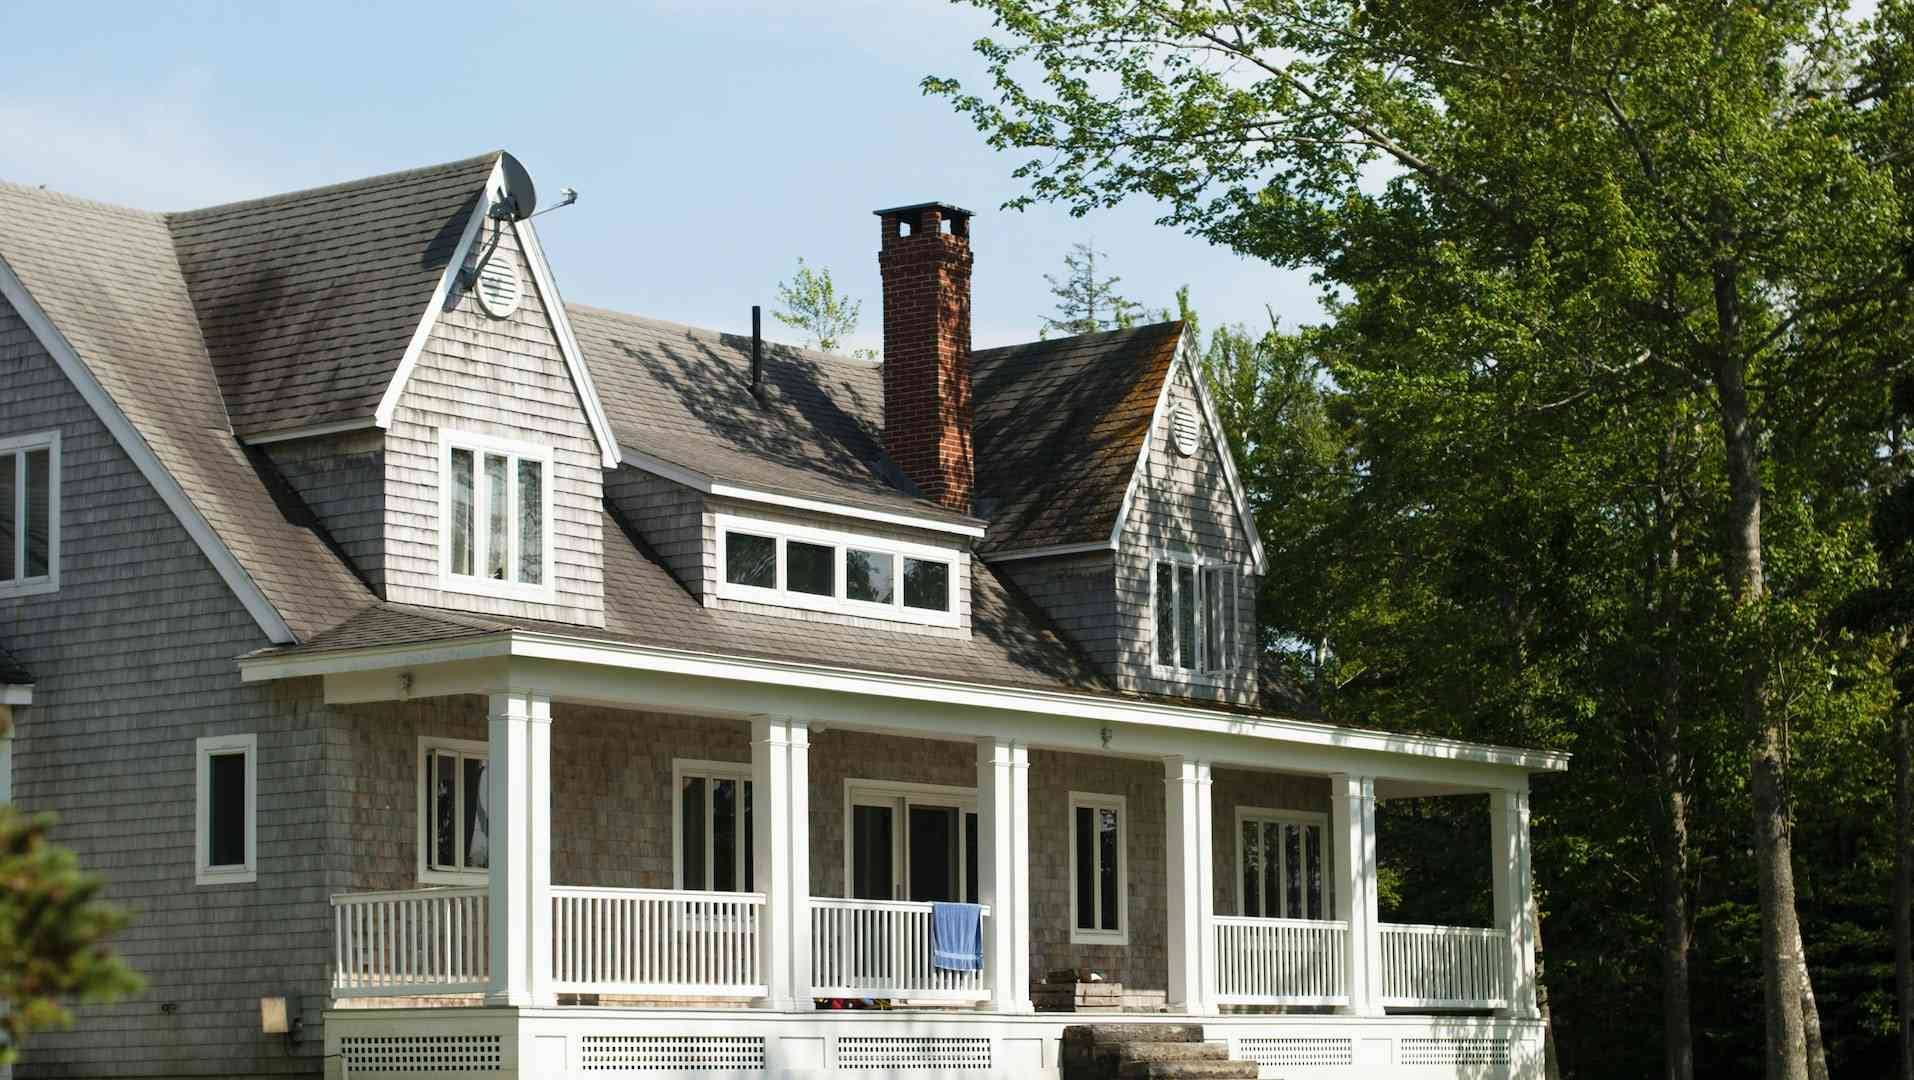 Professional roofing contractors in New Vernon, NJ - Trust us for your roofing needs